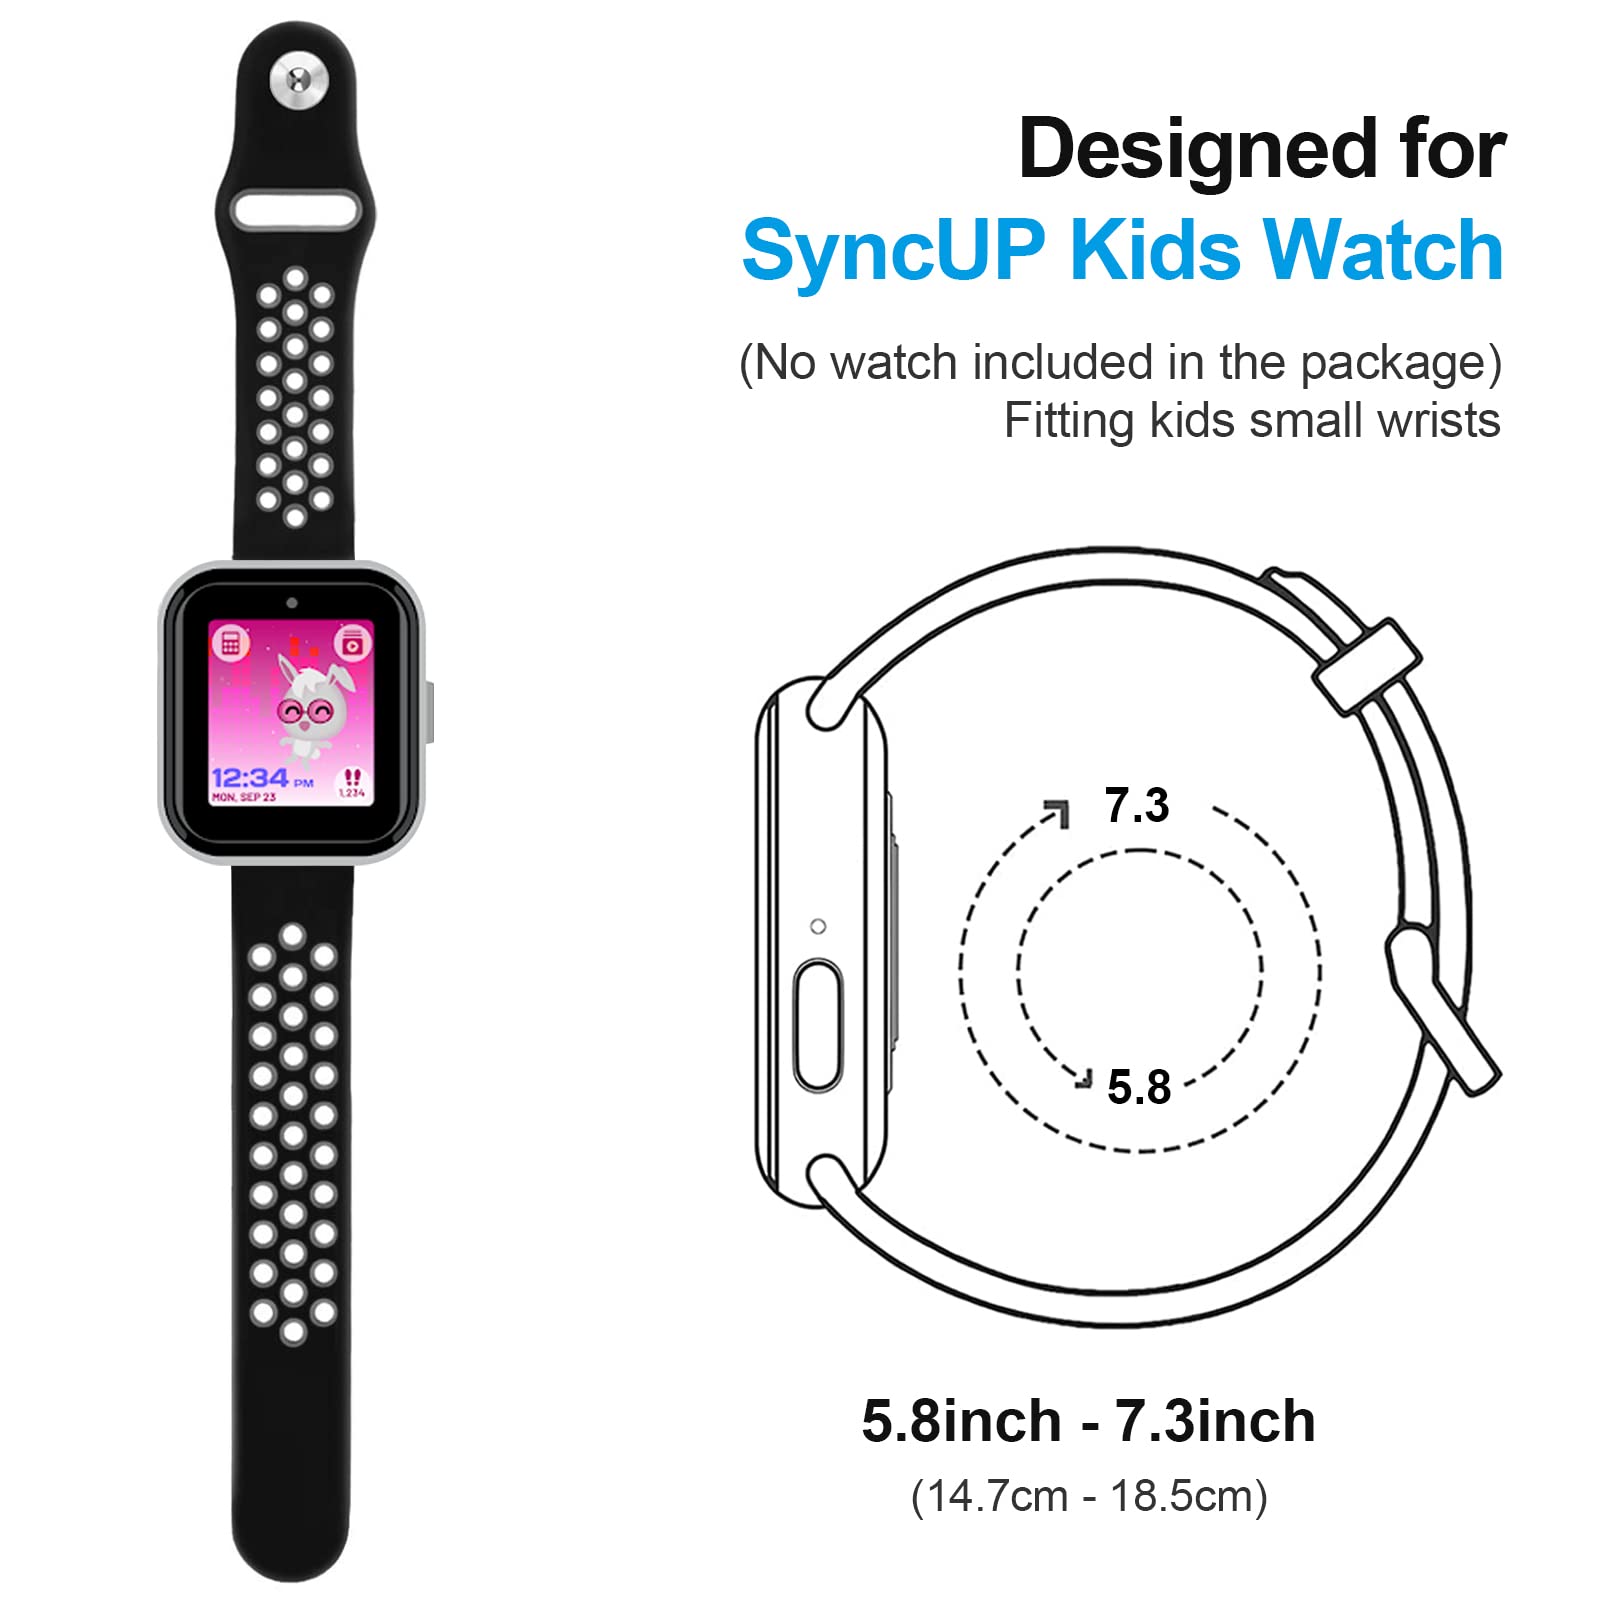 NewJourney 2 Pack SyncUP Kids Watch Band Replacement, Breathable Soft Silicone Sport Wrist Strap Compatible with T-Mobile SyncUP Kids Watch for Boys Girls